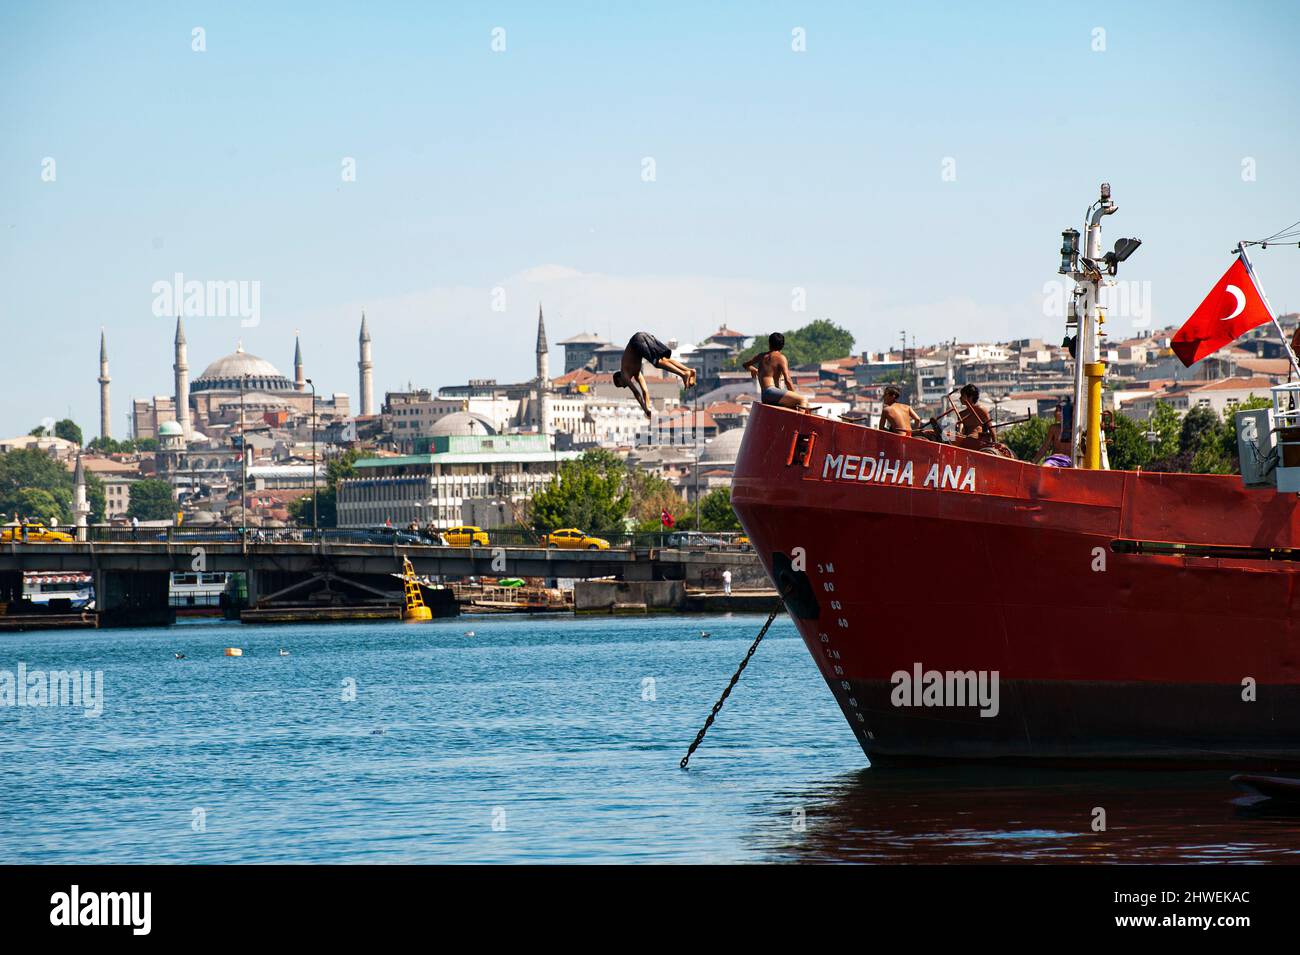 Young Turkish boy jumps off a boat mamed Mediha Ana into the harbor sea across from the Hagia Sophia Mosque in Istanbul, Turkey. Stock Photo